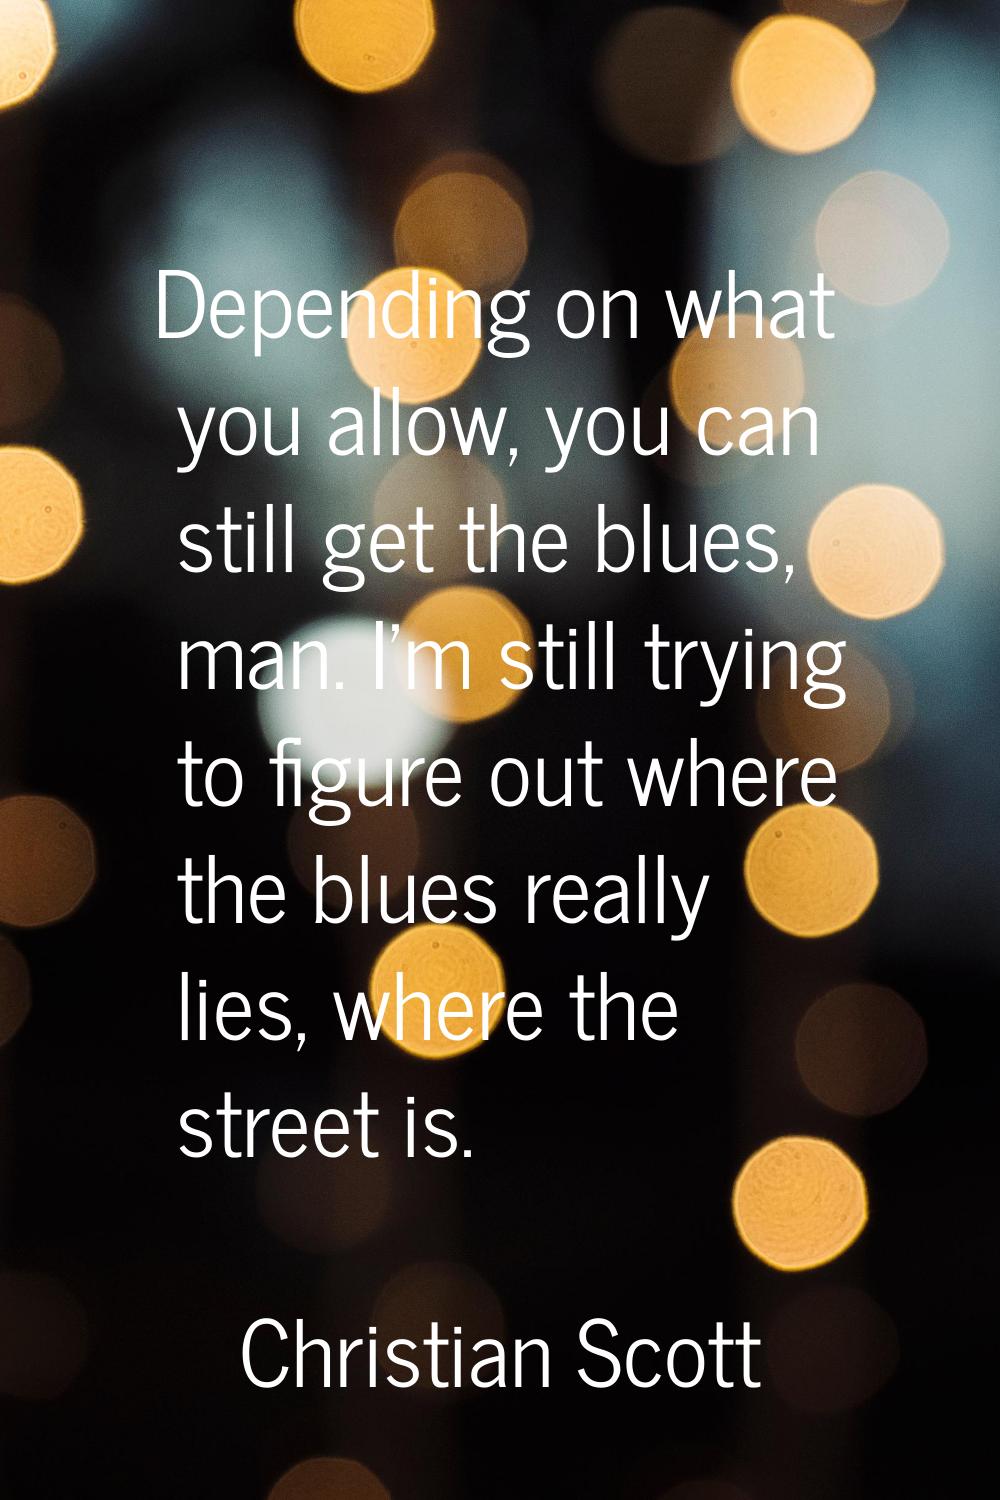 Depending on what you allow, you can still get the blues, man. I'm still trying to figure out where